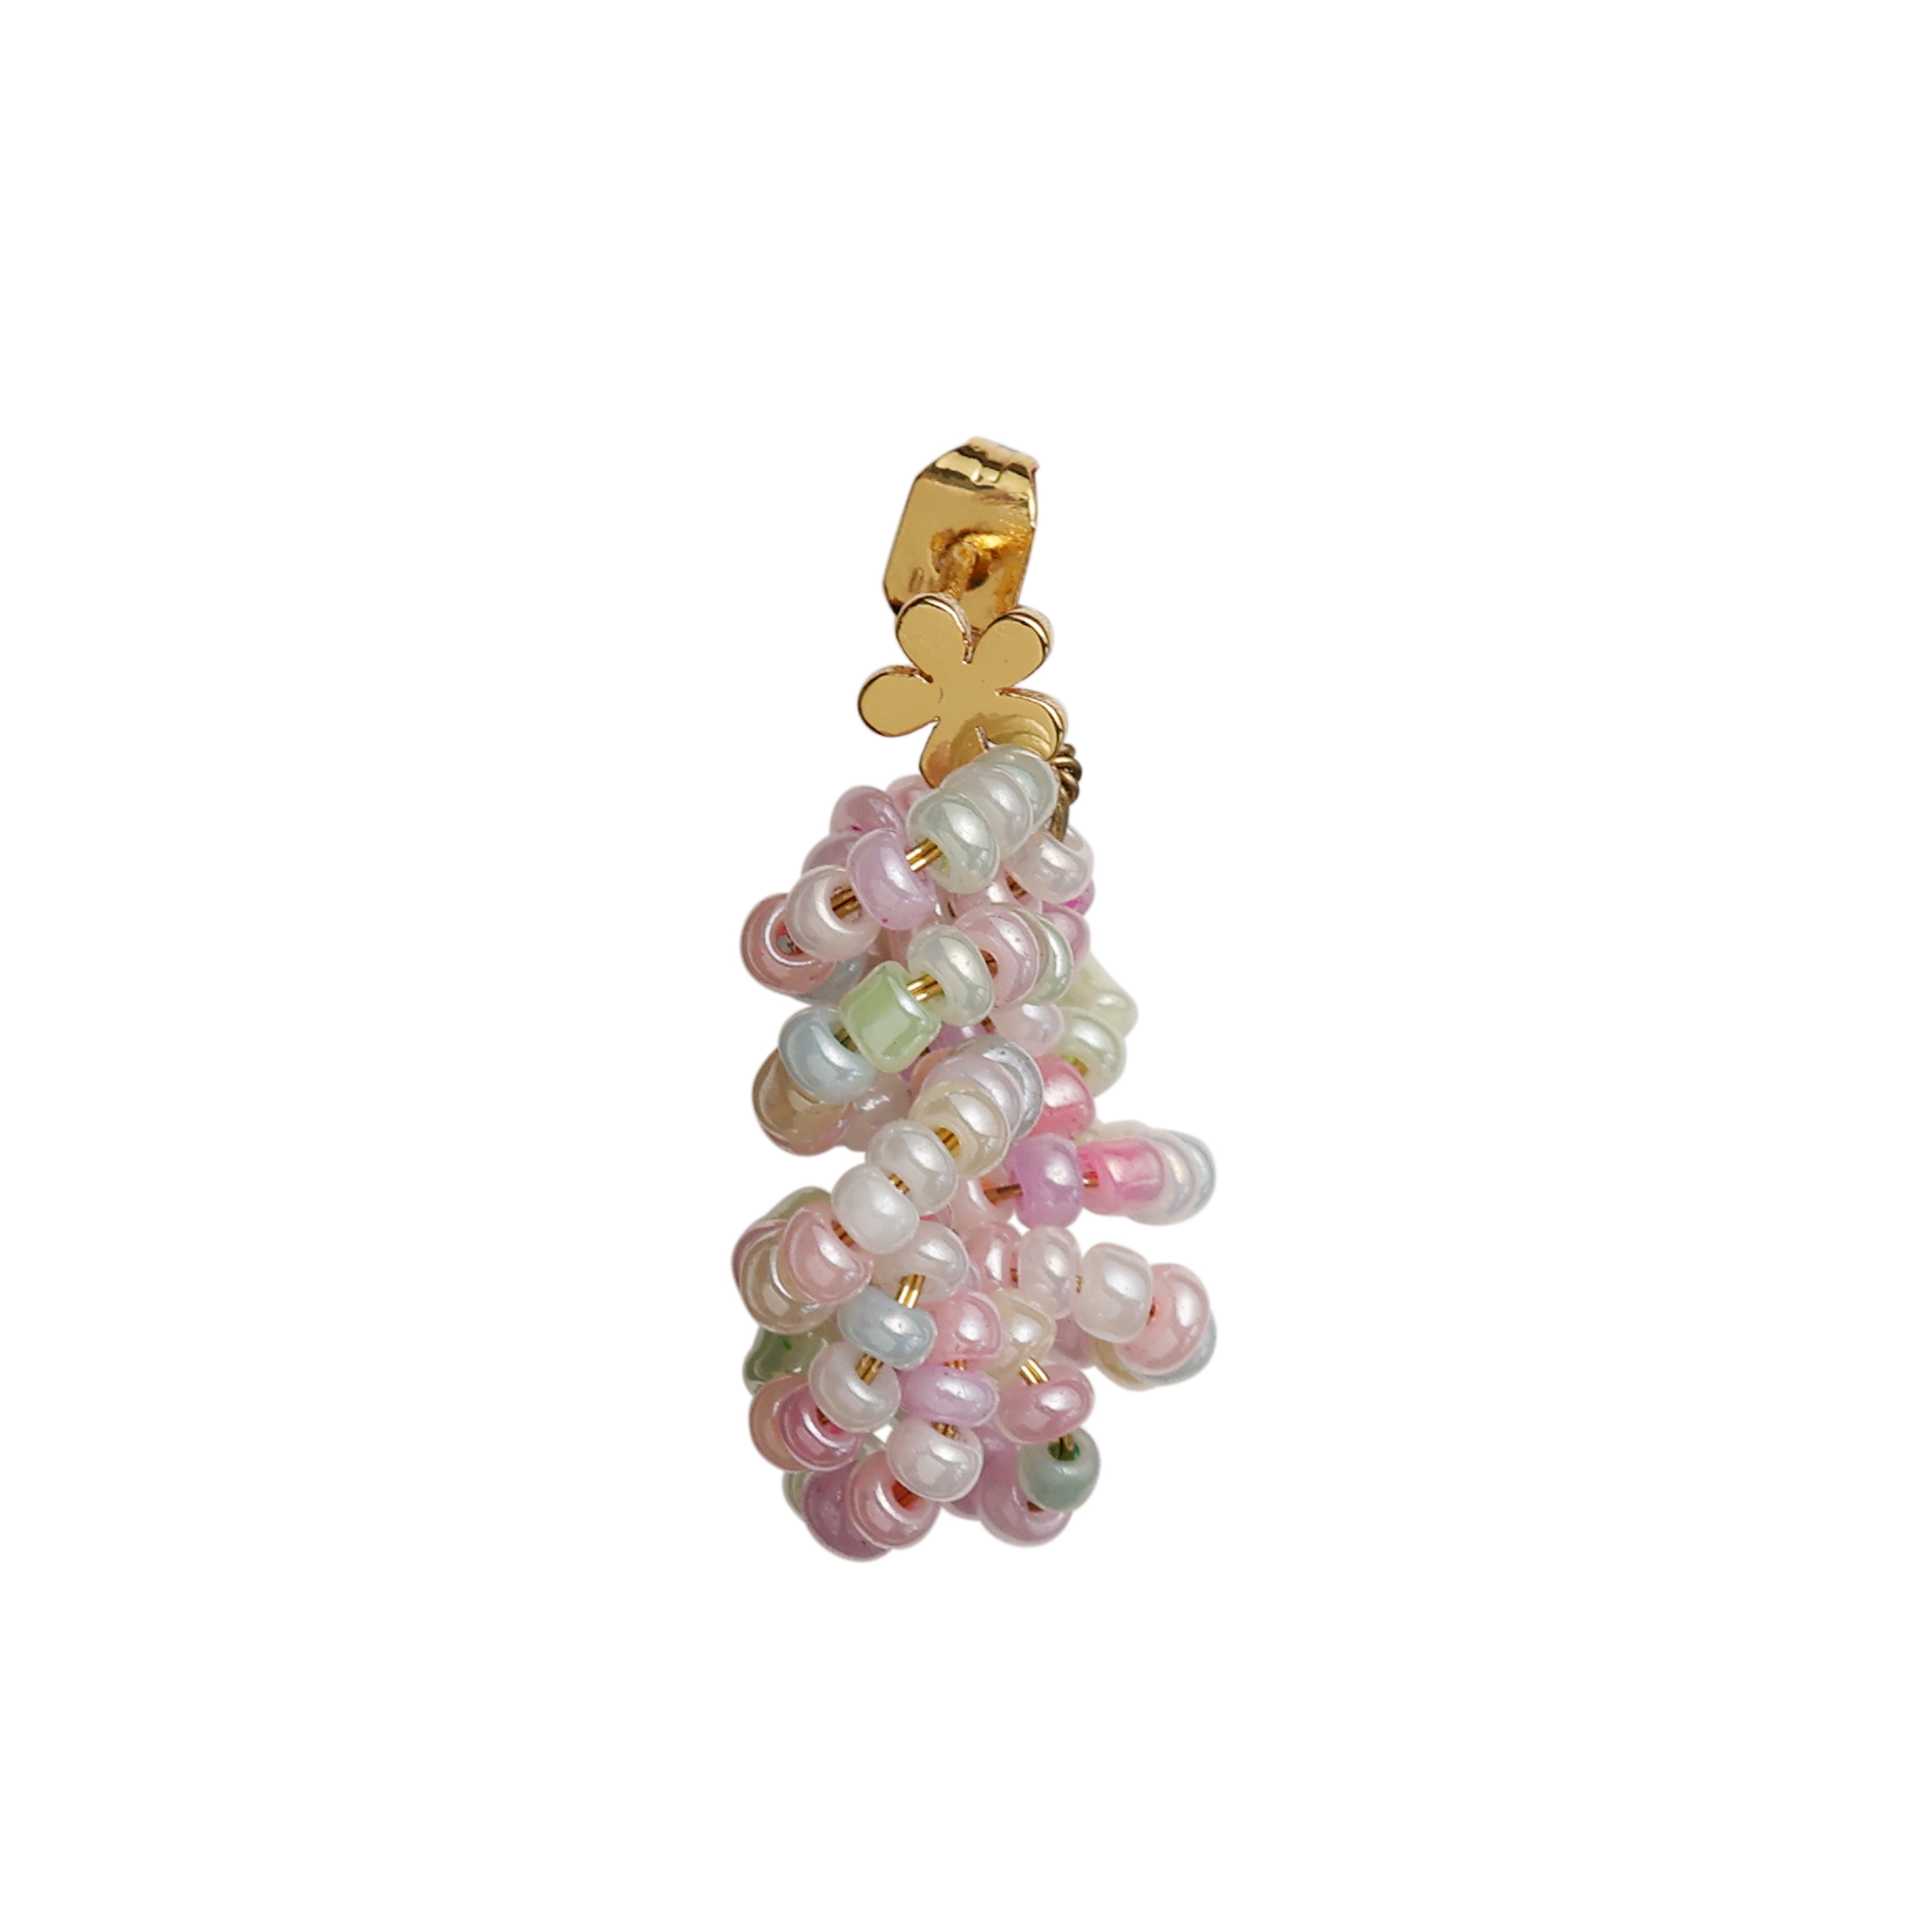 DIY Twisted earring with pastel pearls - including jewelry parts for 1 pair of earrings